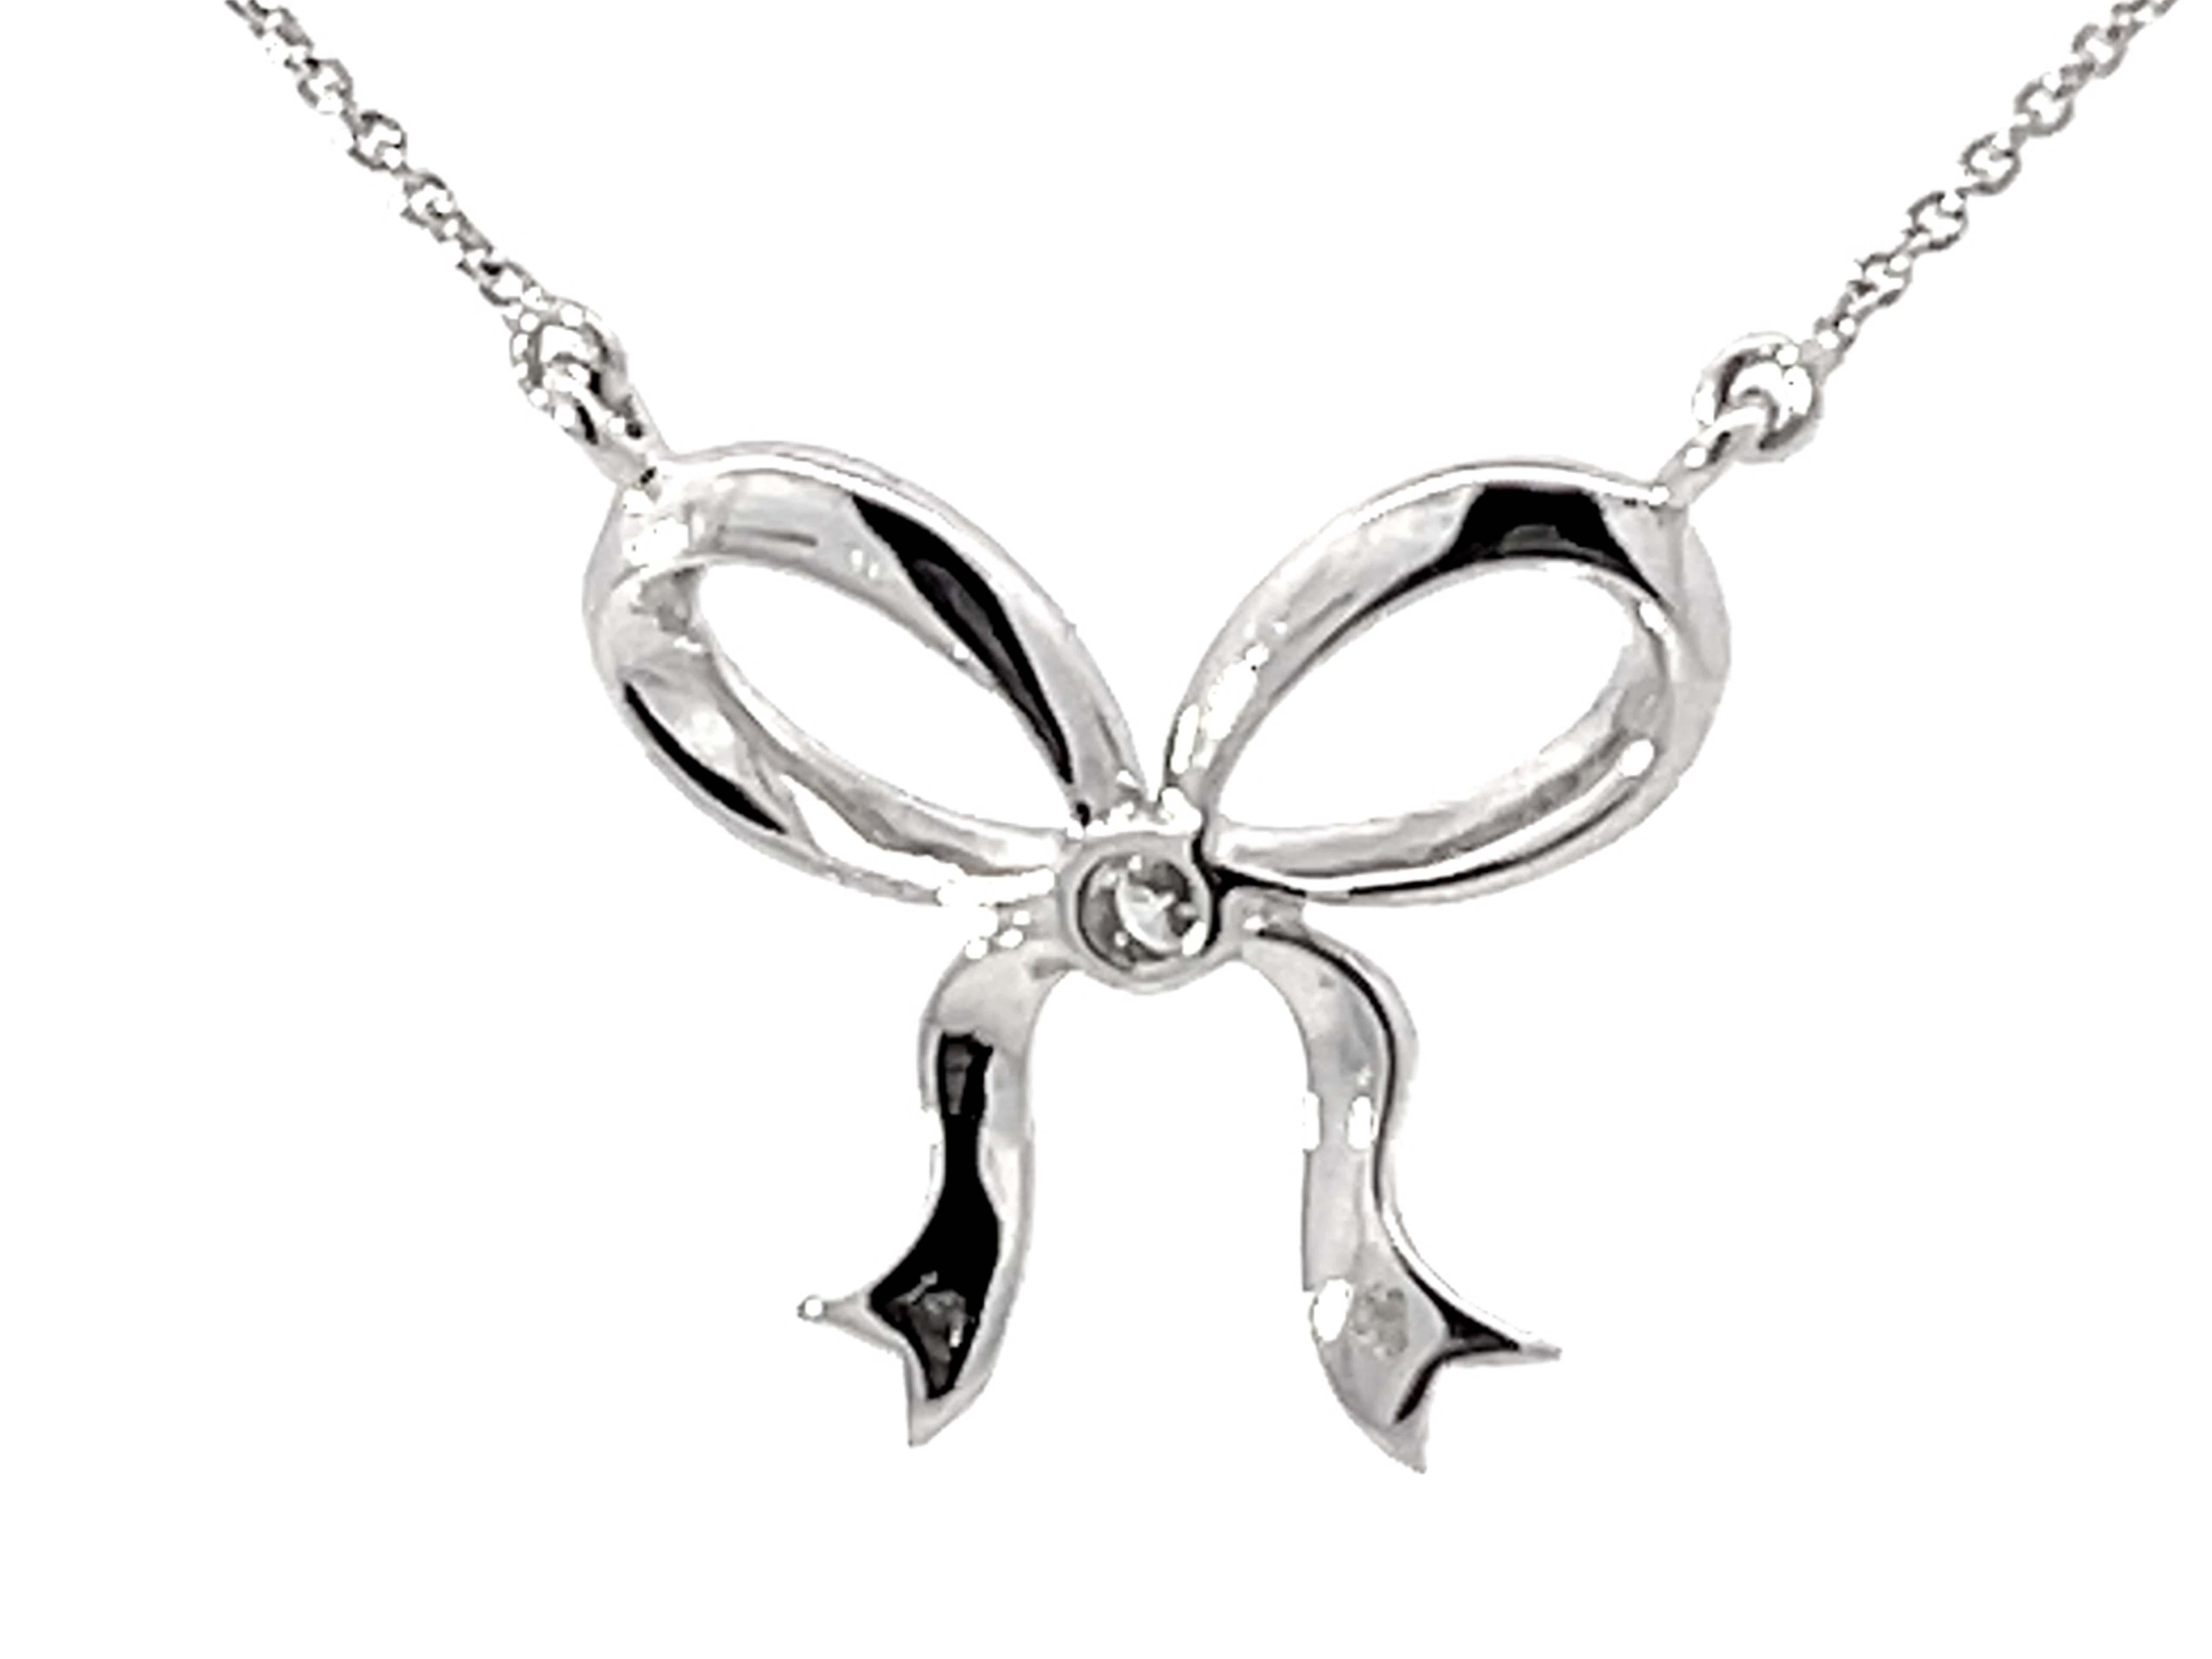 Beverley K Diamond Bowtie Pendant Necklace Solid White Gold For Sale 1